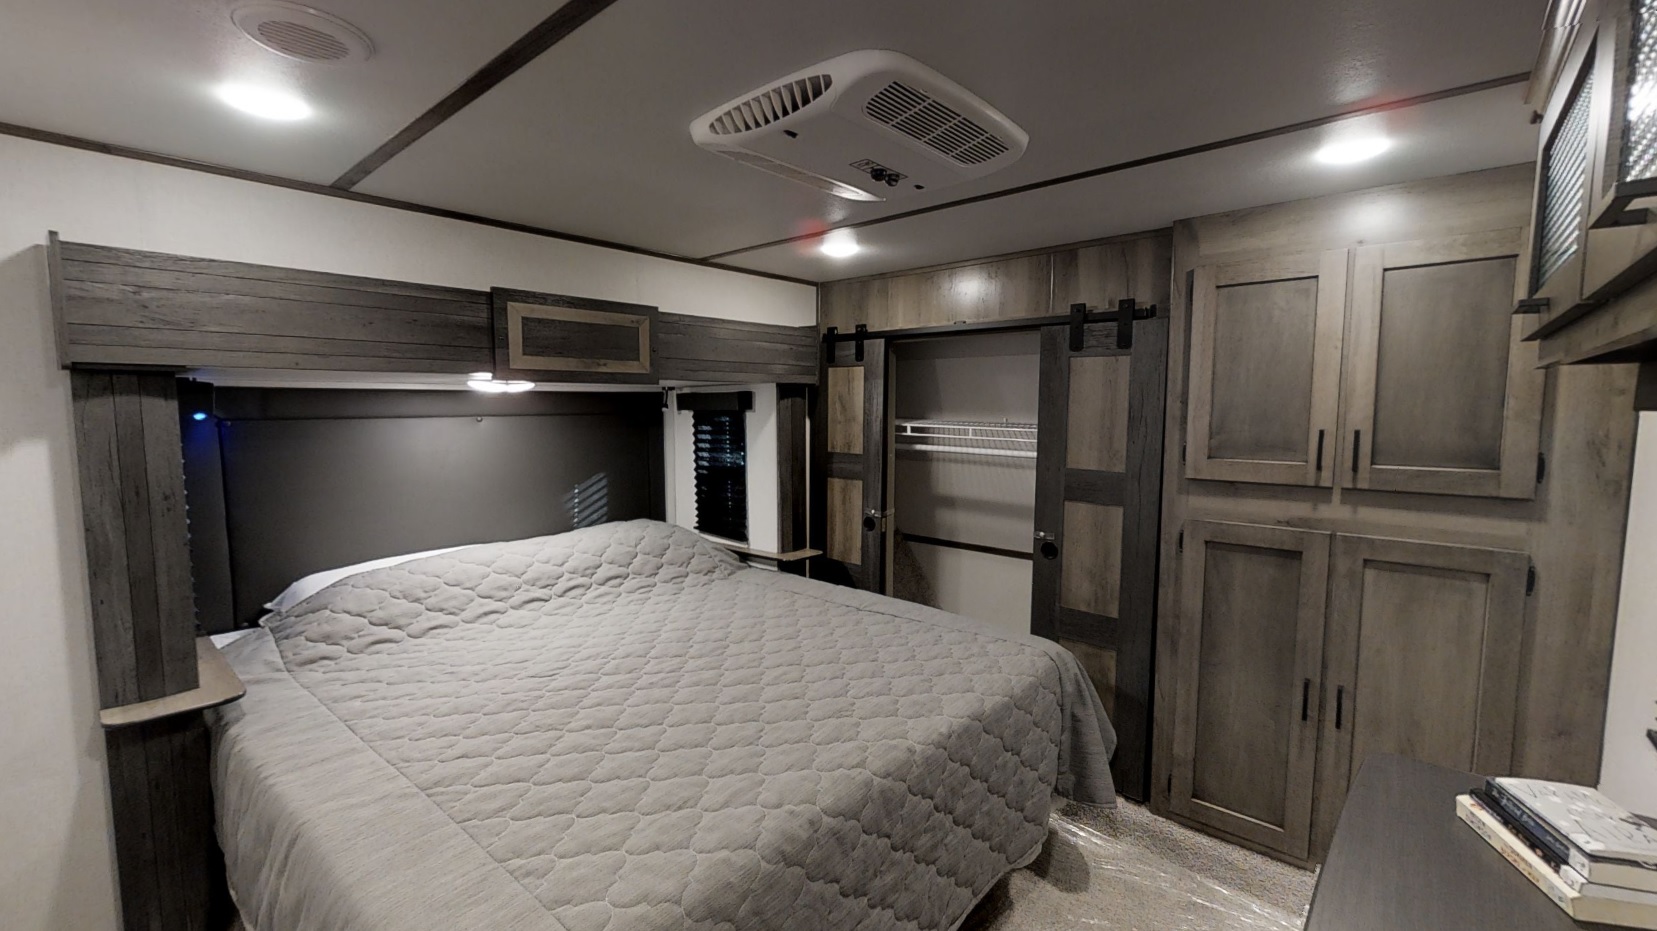 Two Bedroom 5th Wheel With Loft - Byerly RV